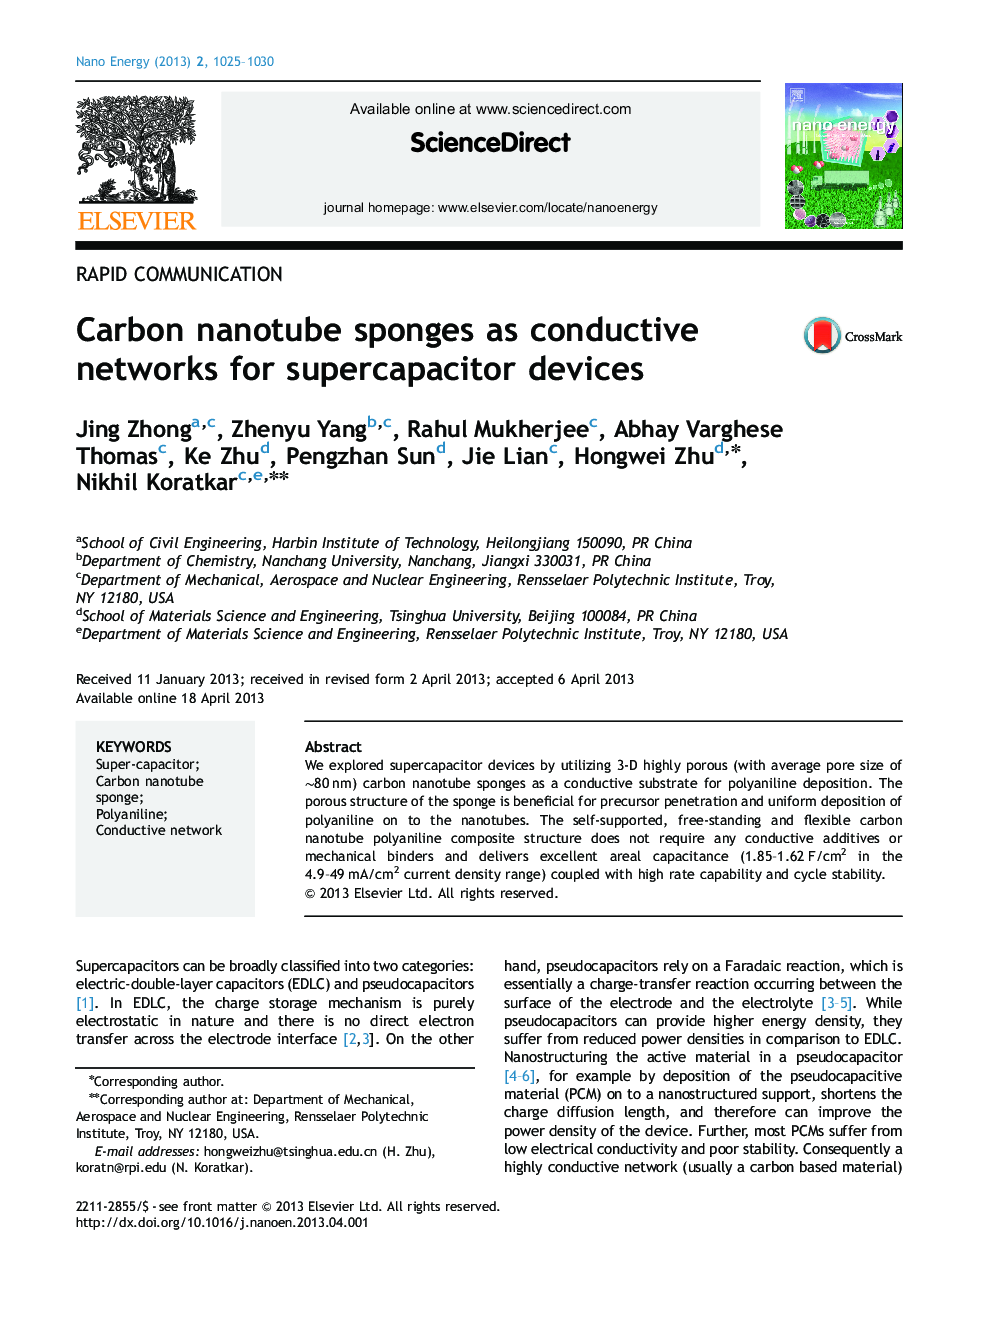 Carbon nanotube sponges as conductive networks for supercapacitor devices